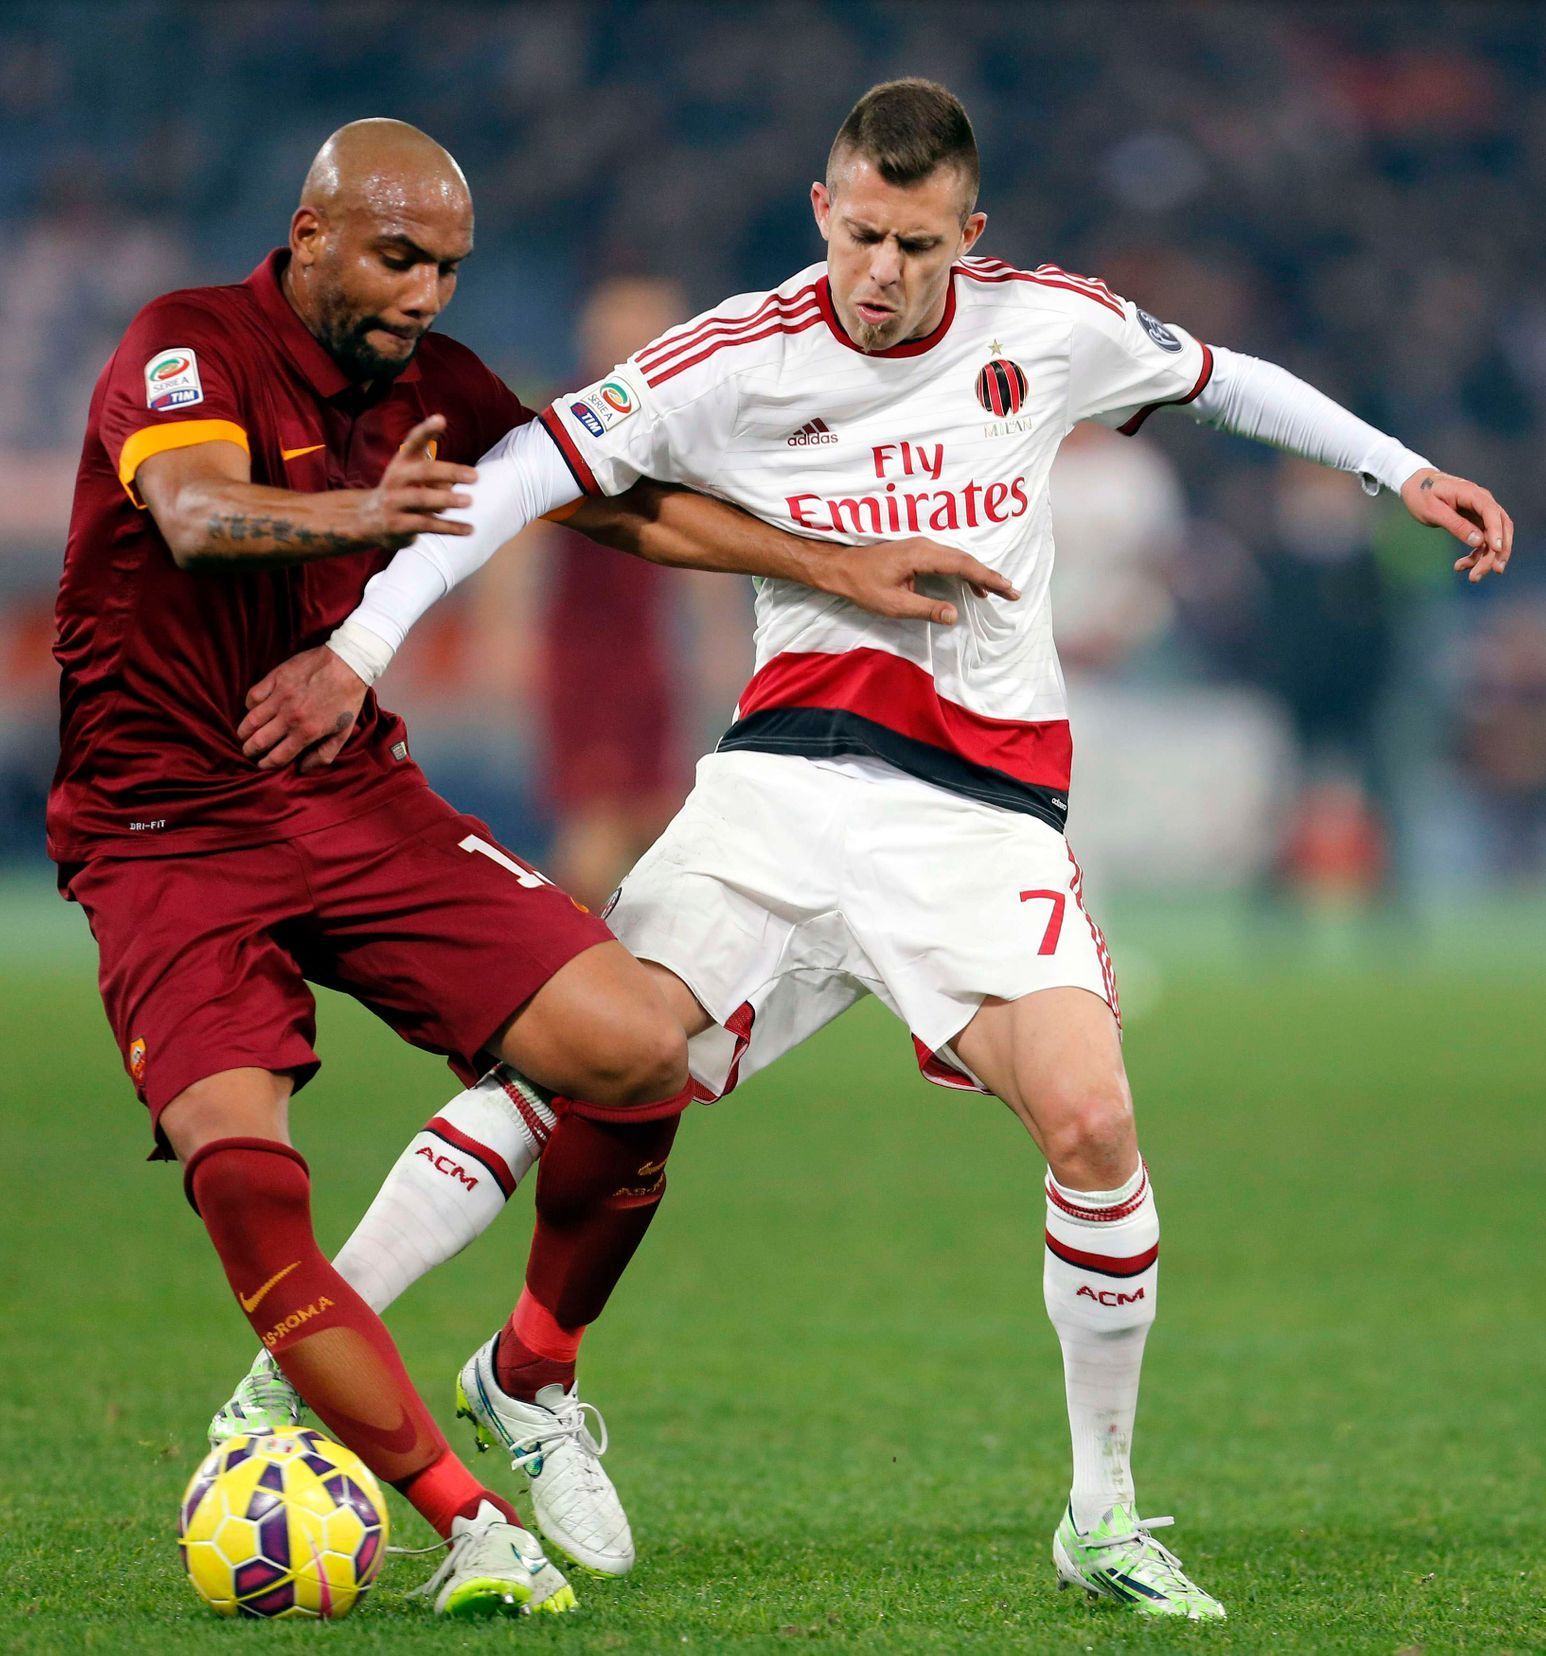 AS Roma's Maicon challenges AC Milan's Menez during their Italian Serie A soccer match in Rome